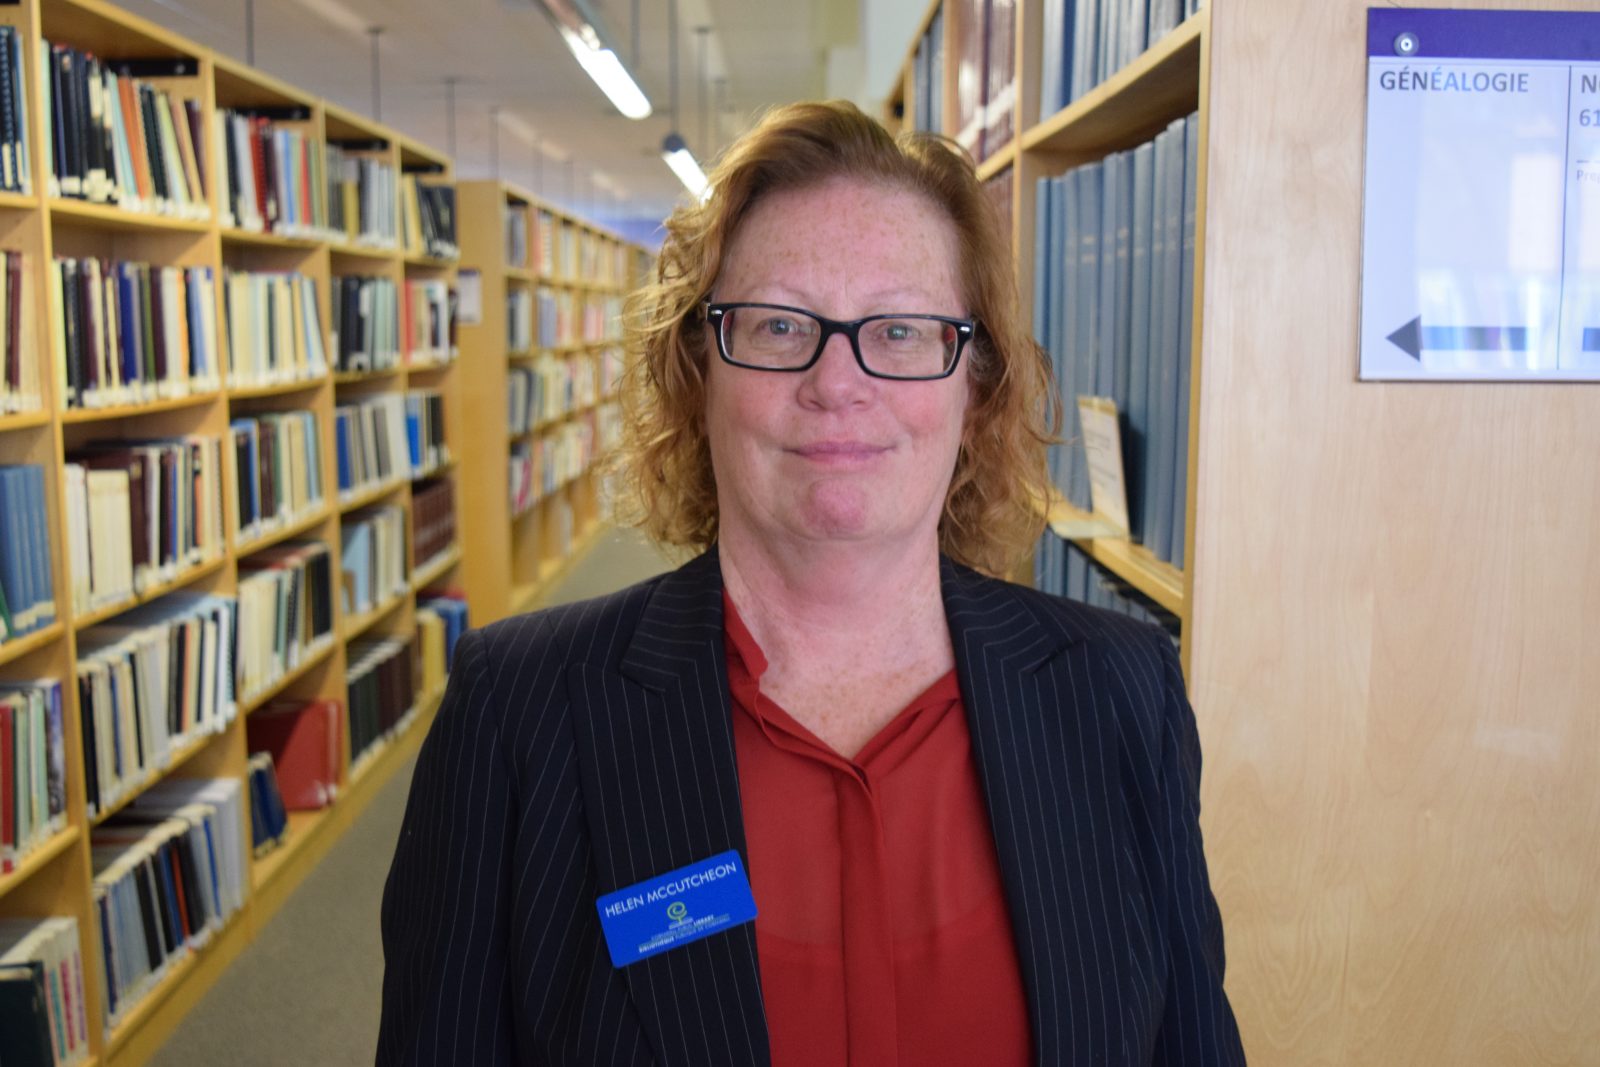 Cornwall Library introduces new CEO